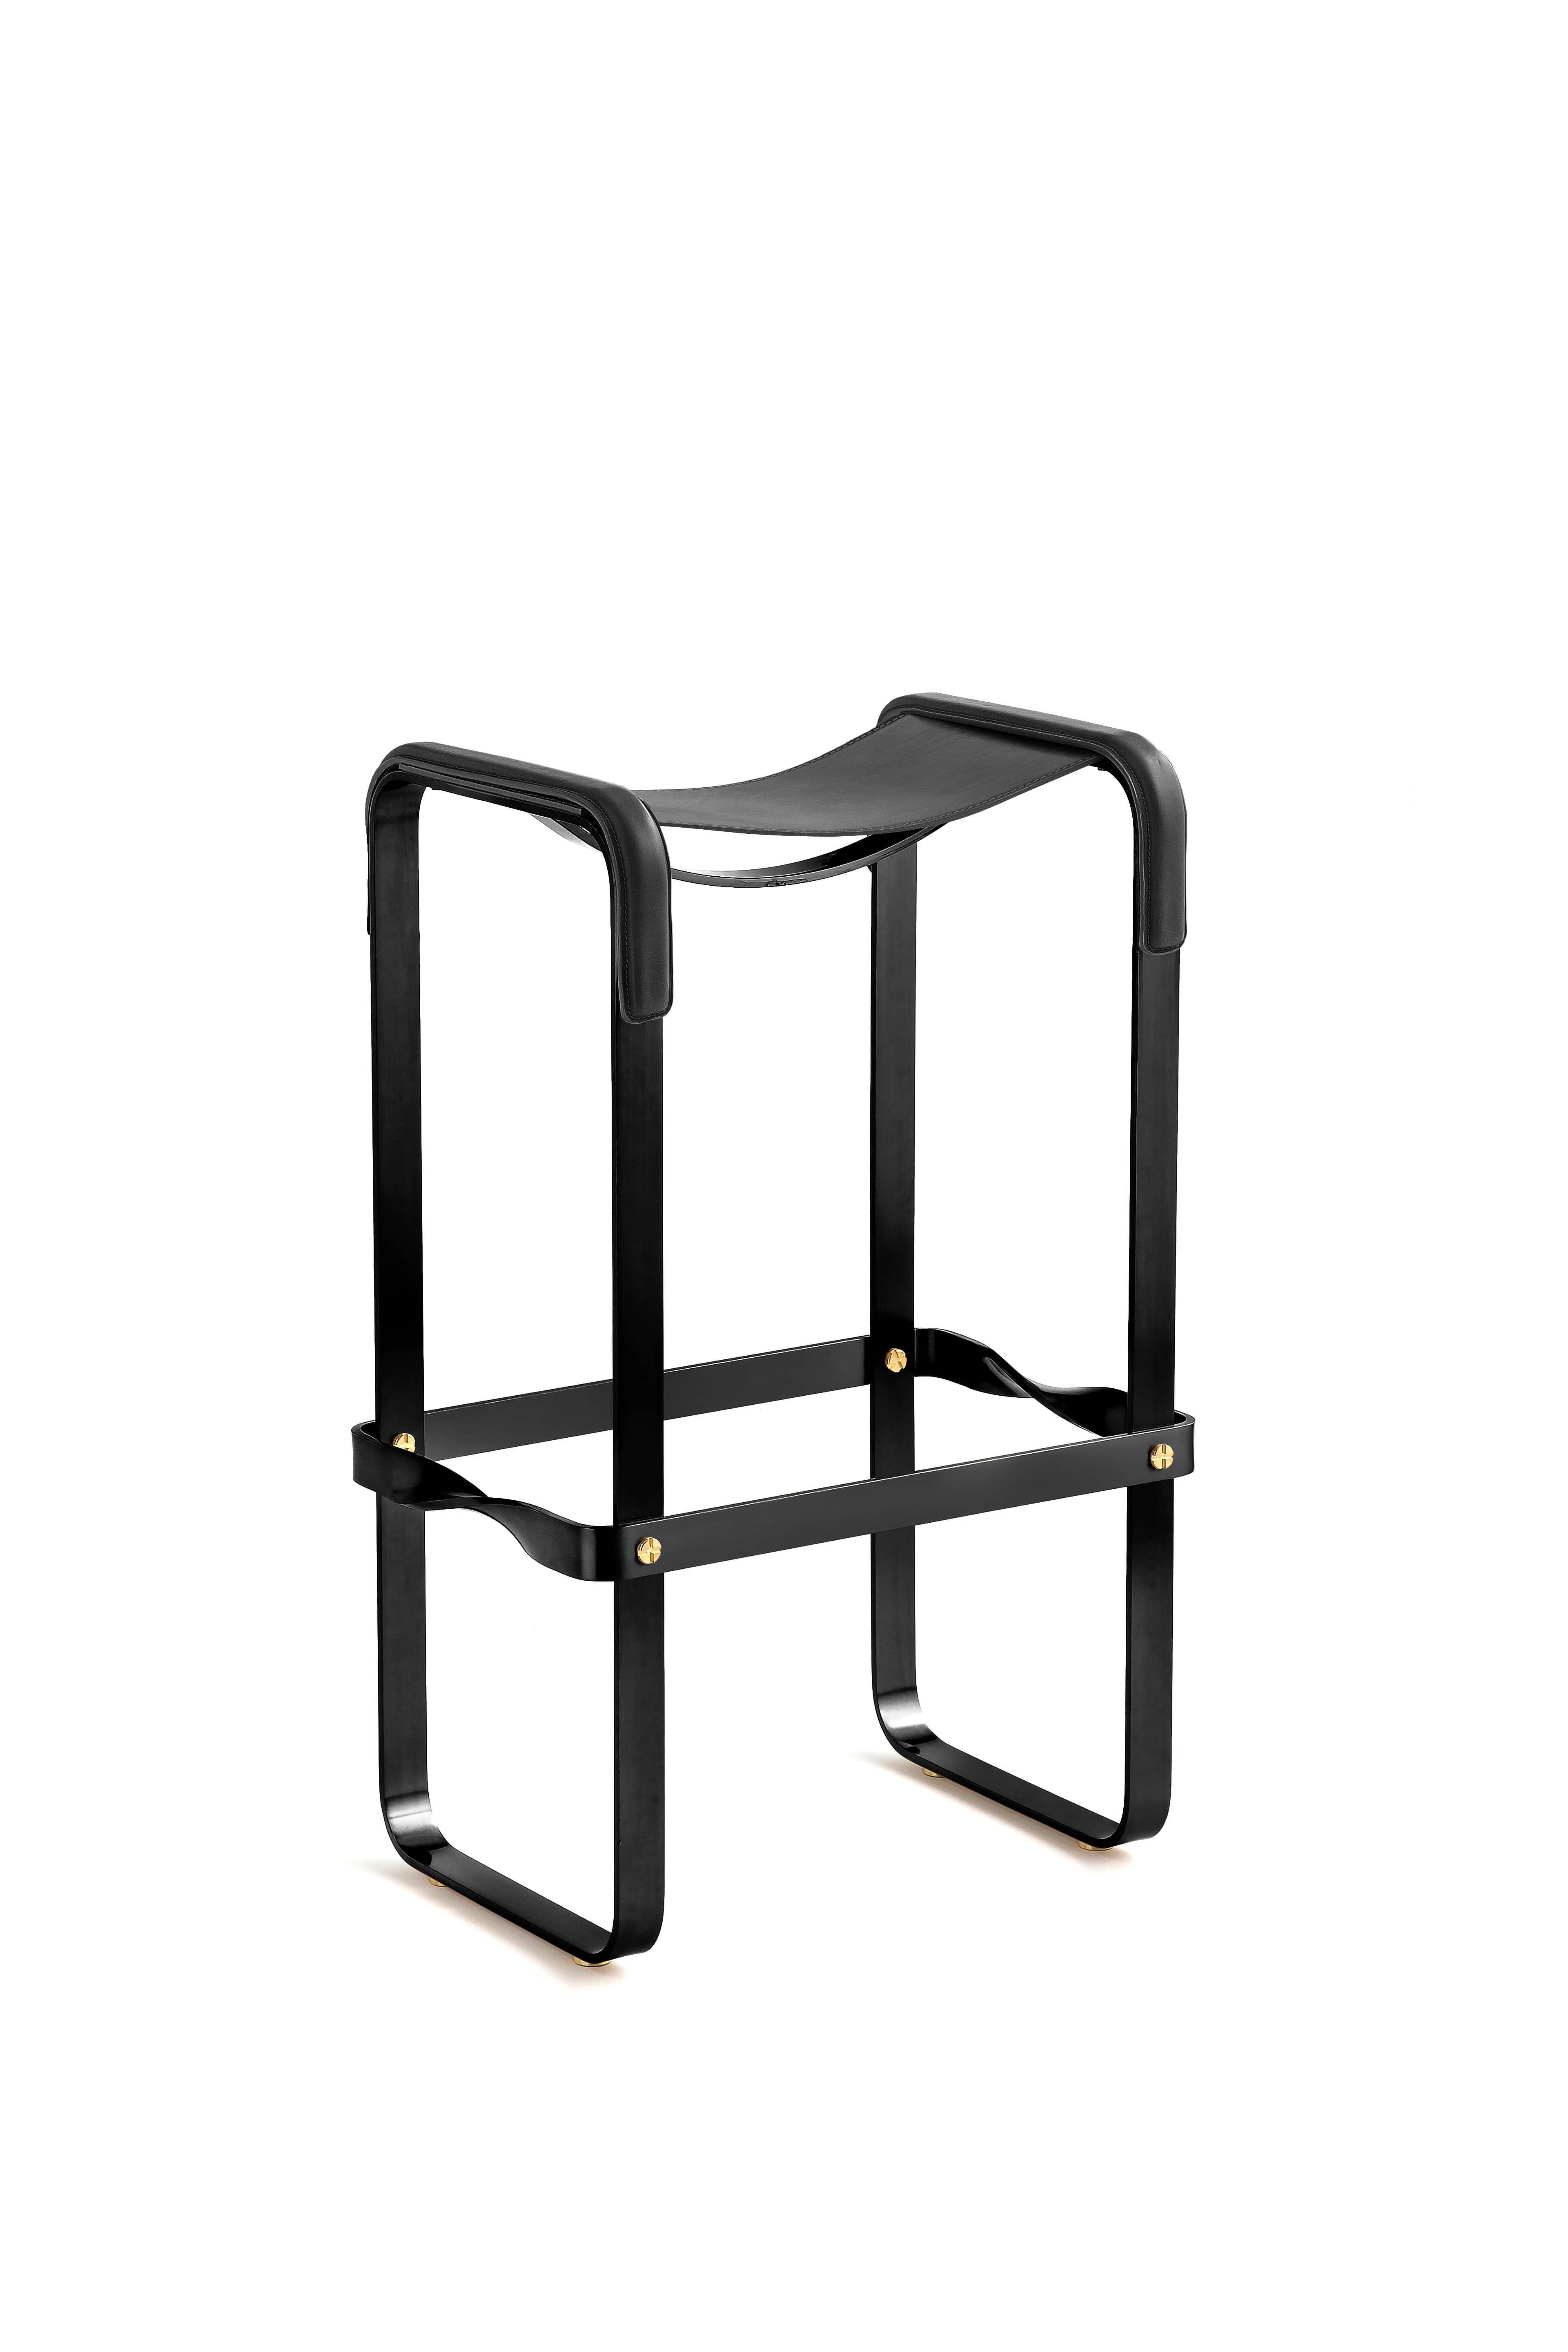 Polished Pair Classic Contemporary Handmade Bar Stool Black Smoke Steel & Black Leather For Sale